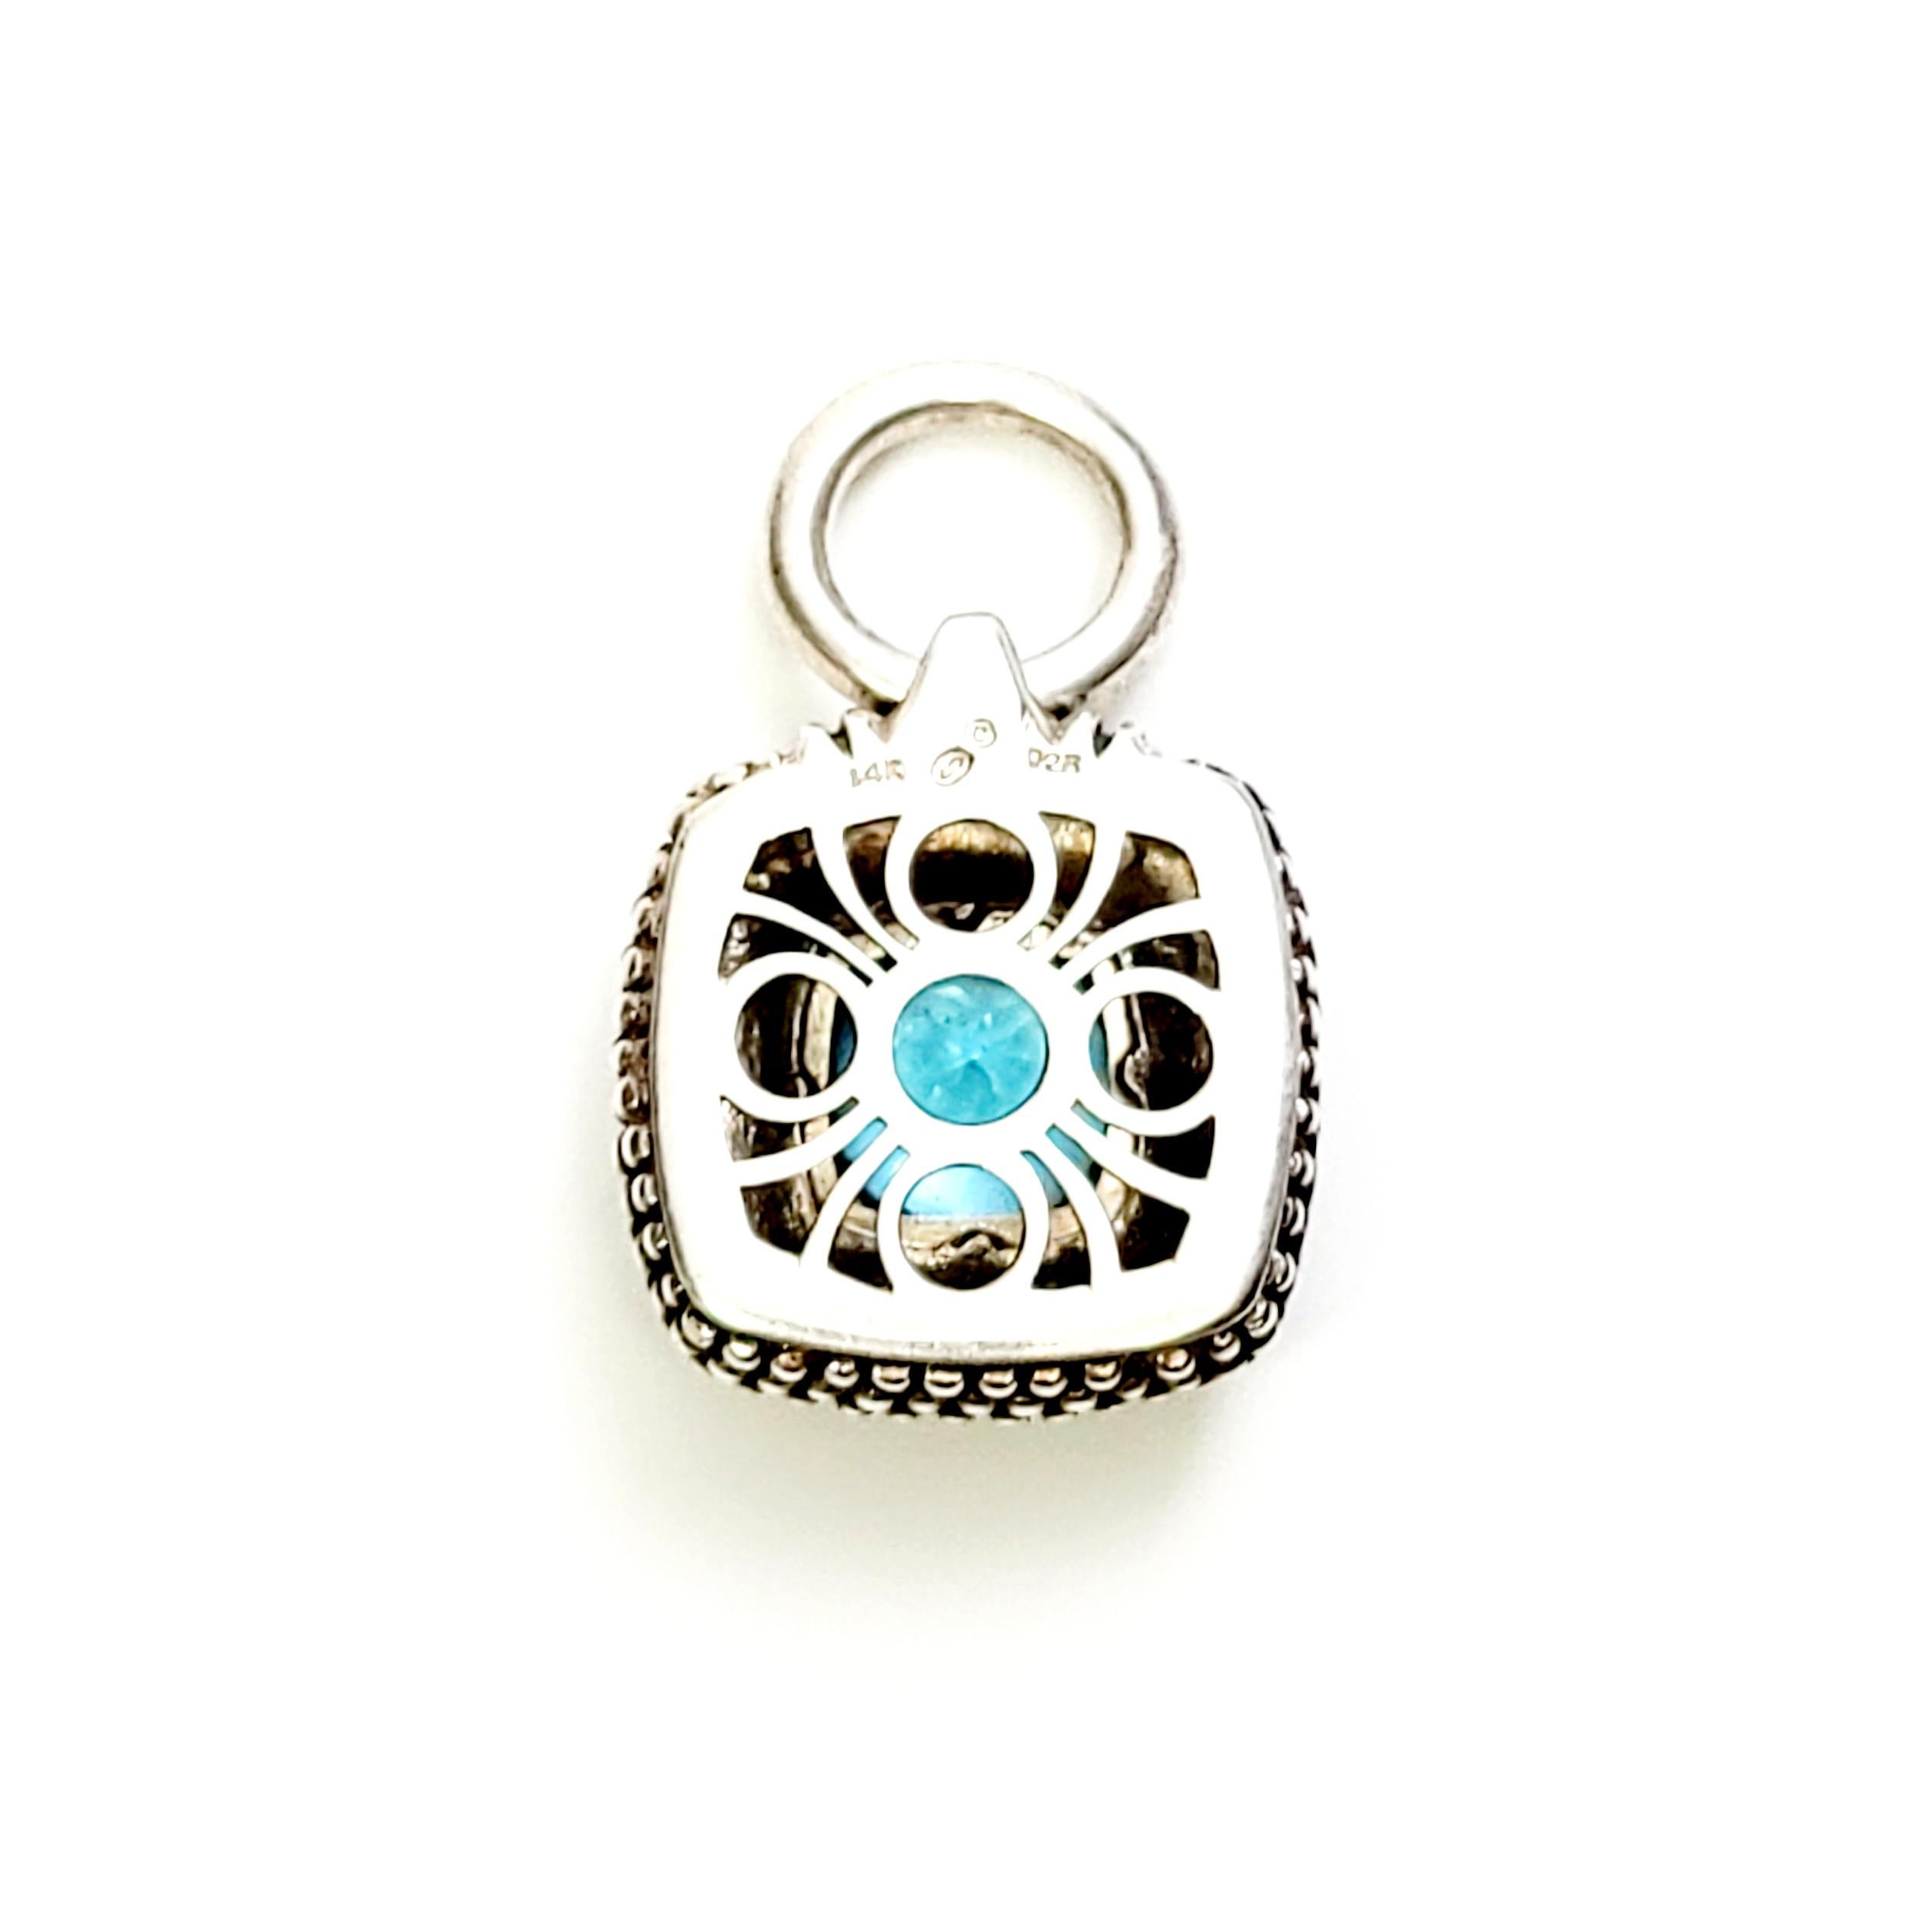 Sterling silver and 14K blue topaz pendant.

This beautiful square sterling silver caviar style pendant features a square blue topaz bezel set in a 14K yellow gold bezel.

Measures approx 1 3/4